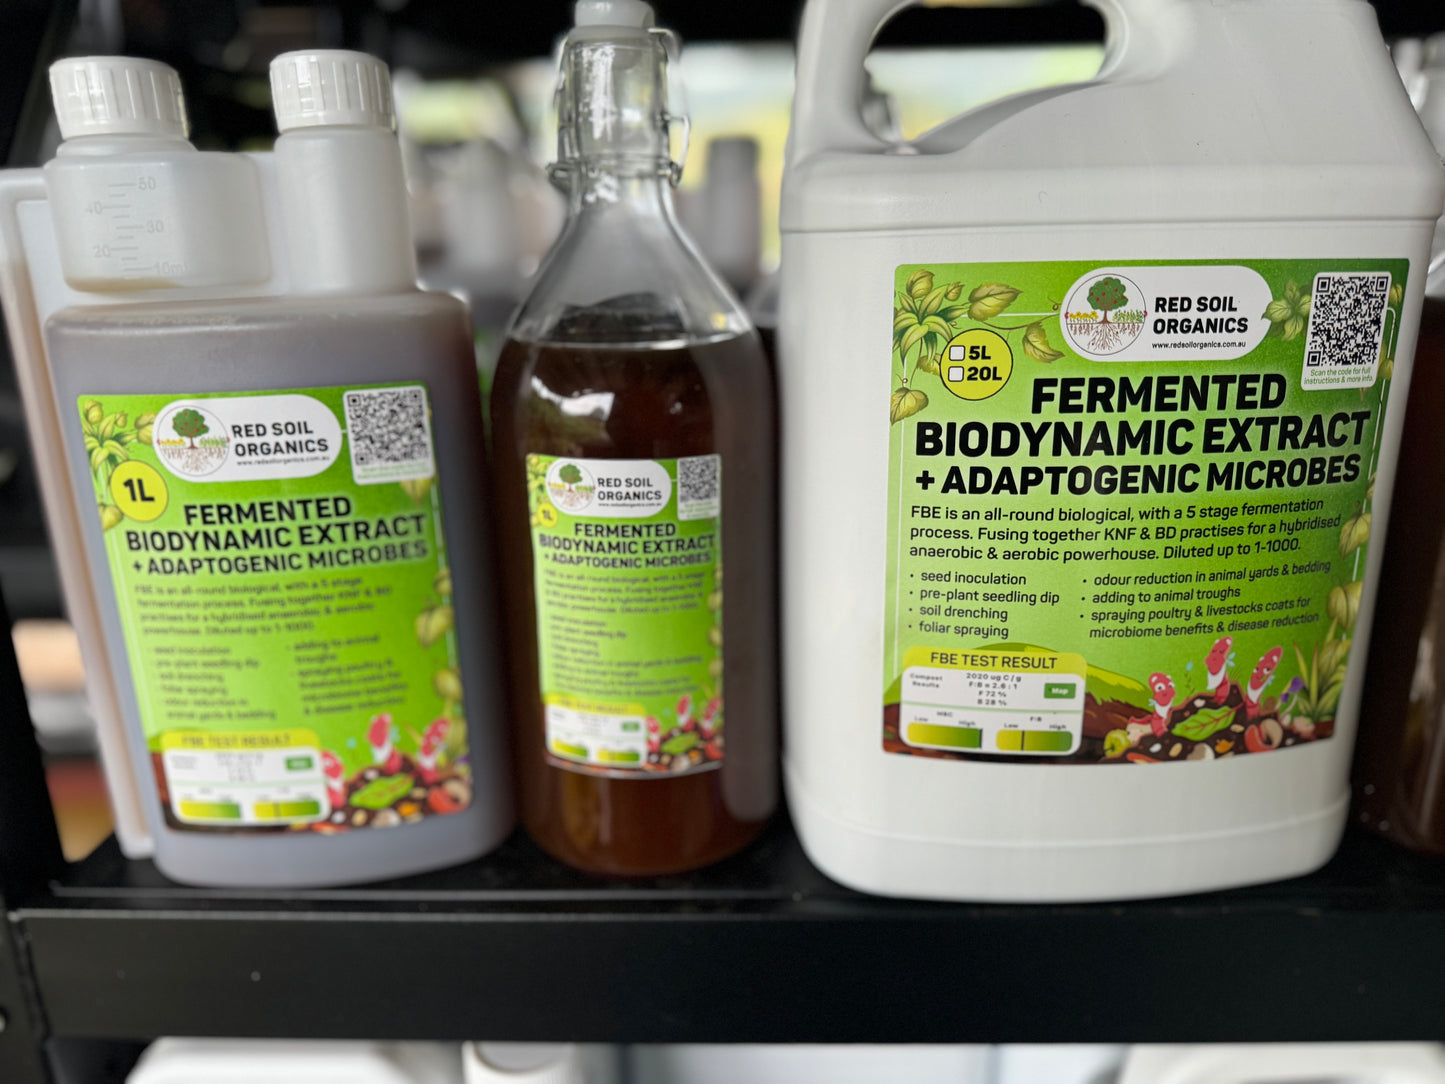 Fermented Biodynamic Extract + Adaptogenic Microbes